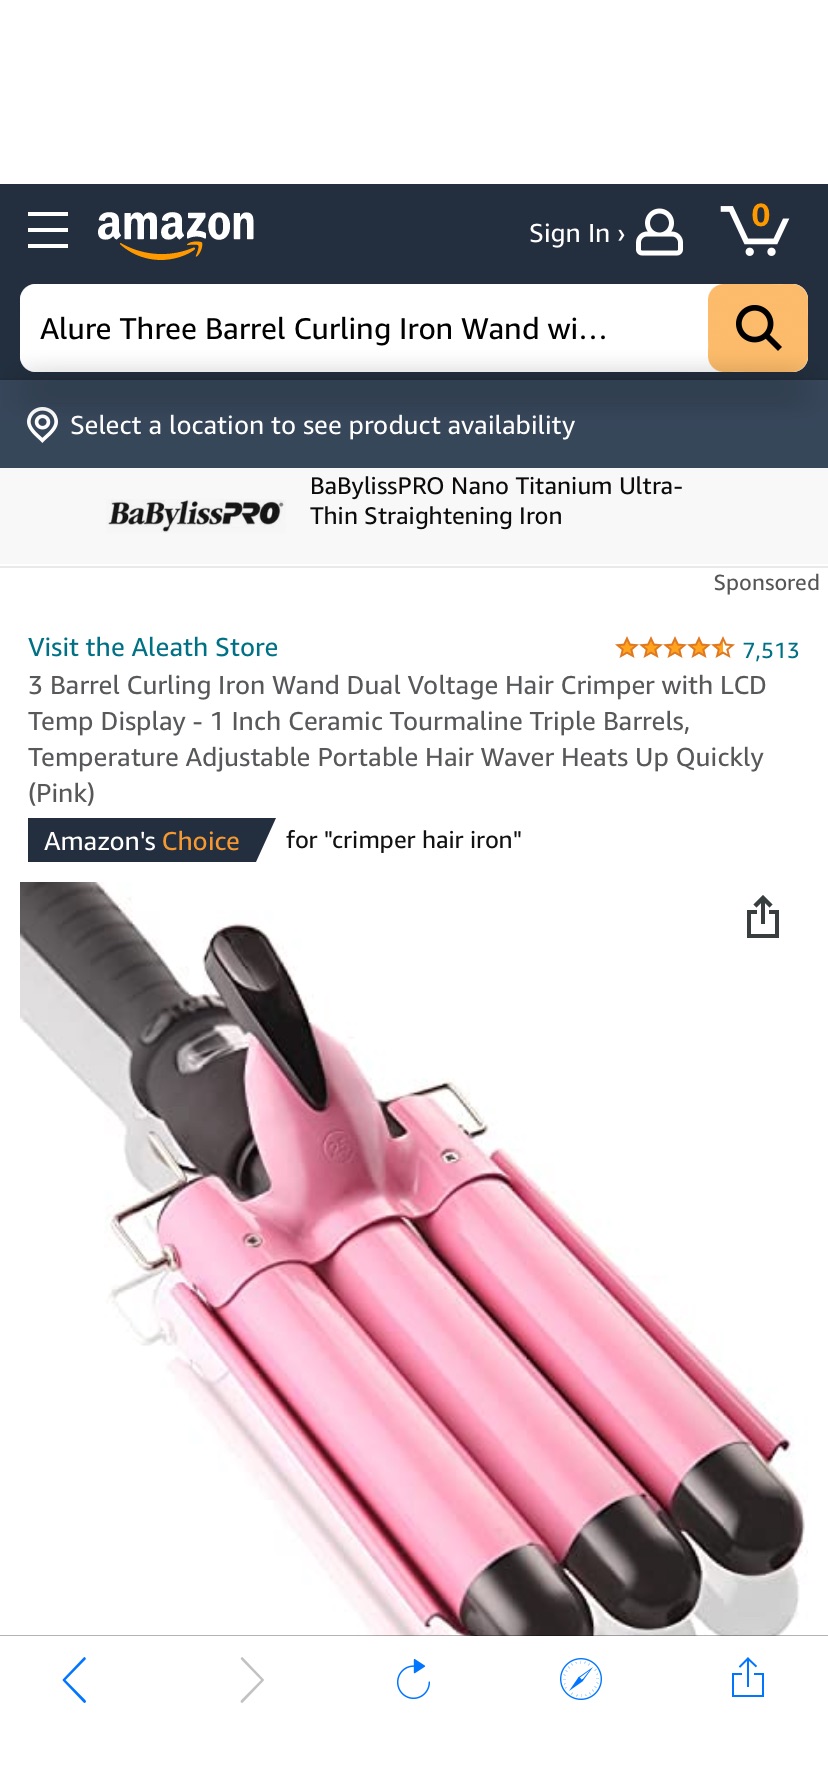 Amazon.com: 3 Barrel Curling Iron Wand Dual Voltage Hair Crimper with LCD Temp Display - 1 Inch Ceramic Tourmaline Triple Barrels, Temperature Adjustable Portable Hair Waver Heats Up Quickly (Pink)